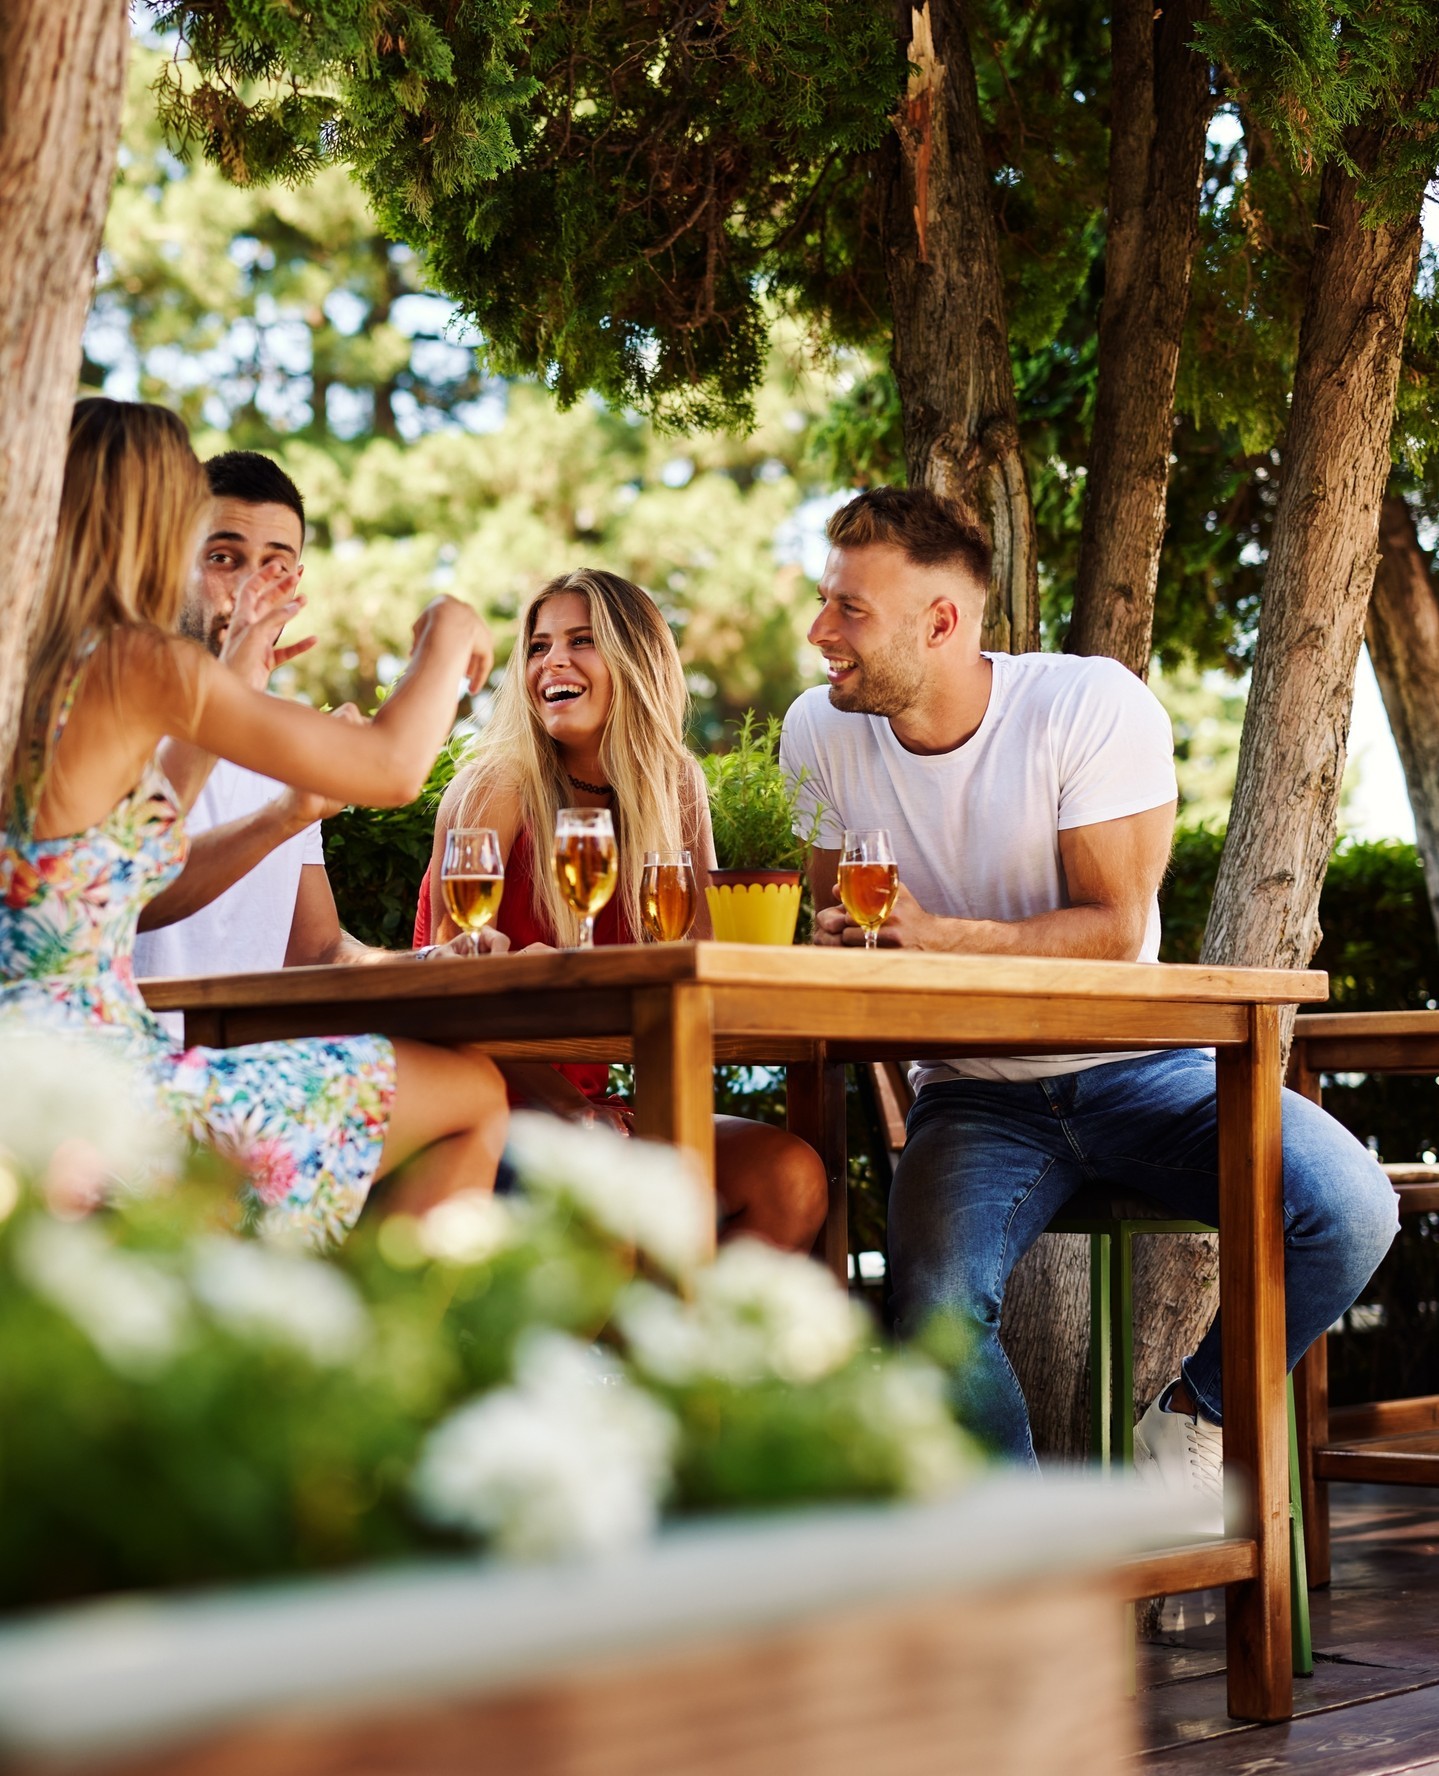 Iowa’s 5 Best Beer Gardens 🍻 Ah, sweet summertime—the perfect season to get outside, enjoy the company of the people we love, and indulge in an endless array of fresh, specially-crafted ales. In Iowa, that dream is a reality come summer—when beloved beer gardens and other local haunts bring their A-game with an updated menu chock-full of decadent beers, spirits and more. Check out our list of beer gardens at FabulousIowa.com.